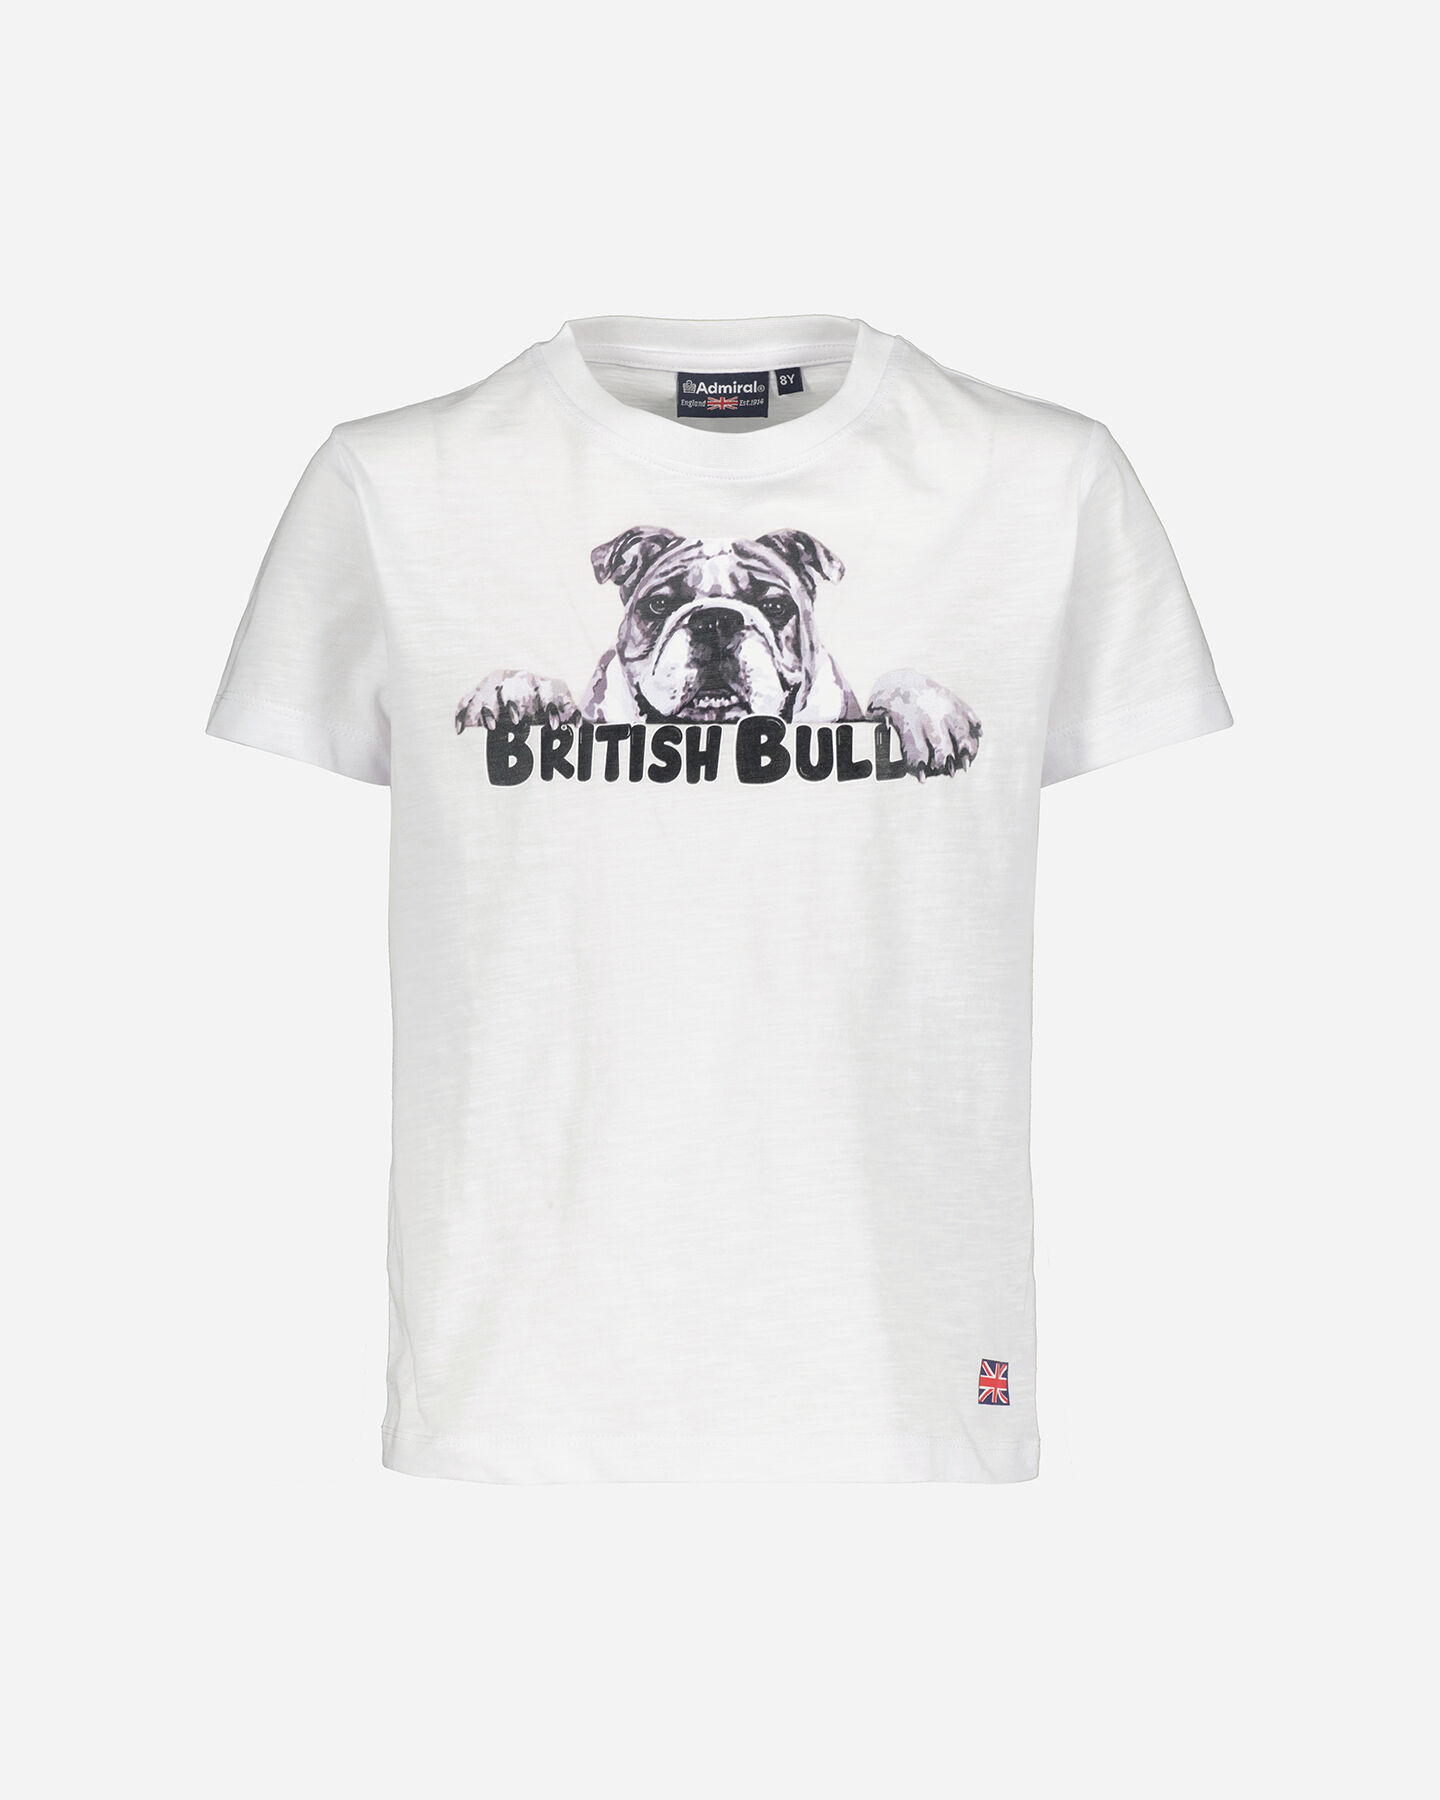  T-Shirt ADMIRAL LIFESTYLE JR S4130315|001|4A scatto 0